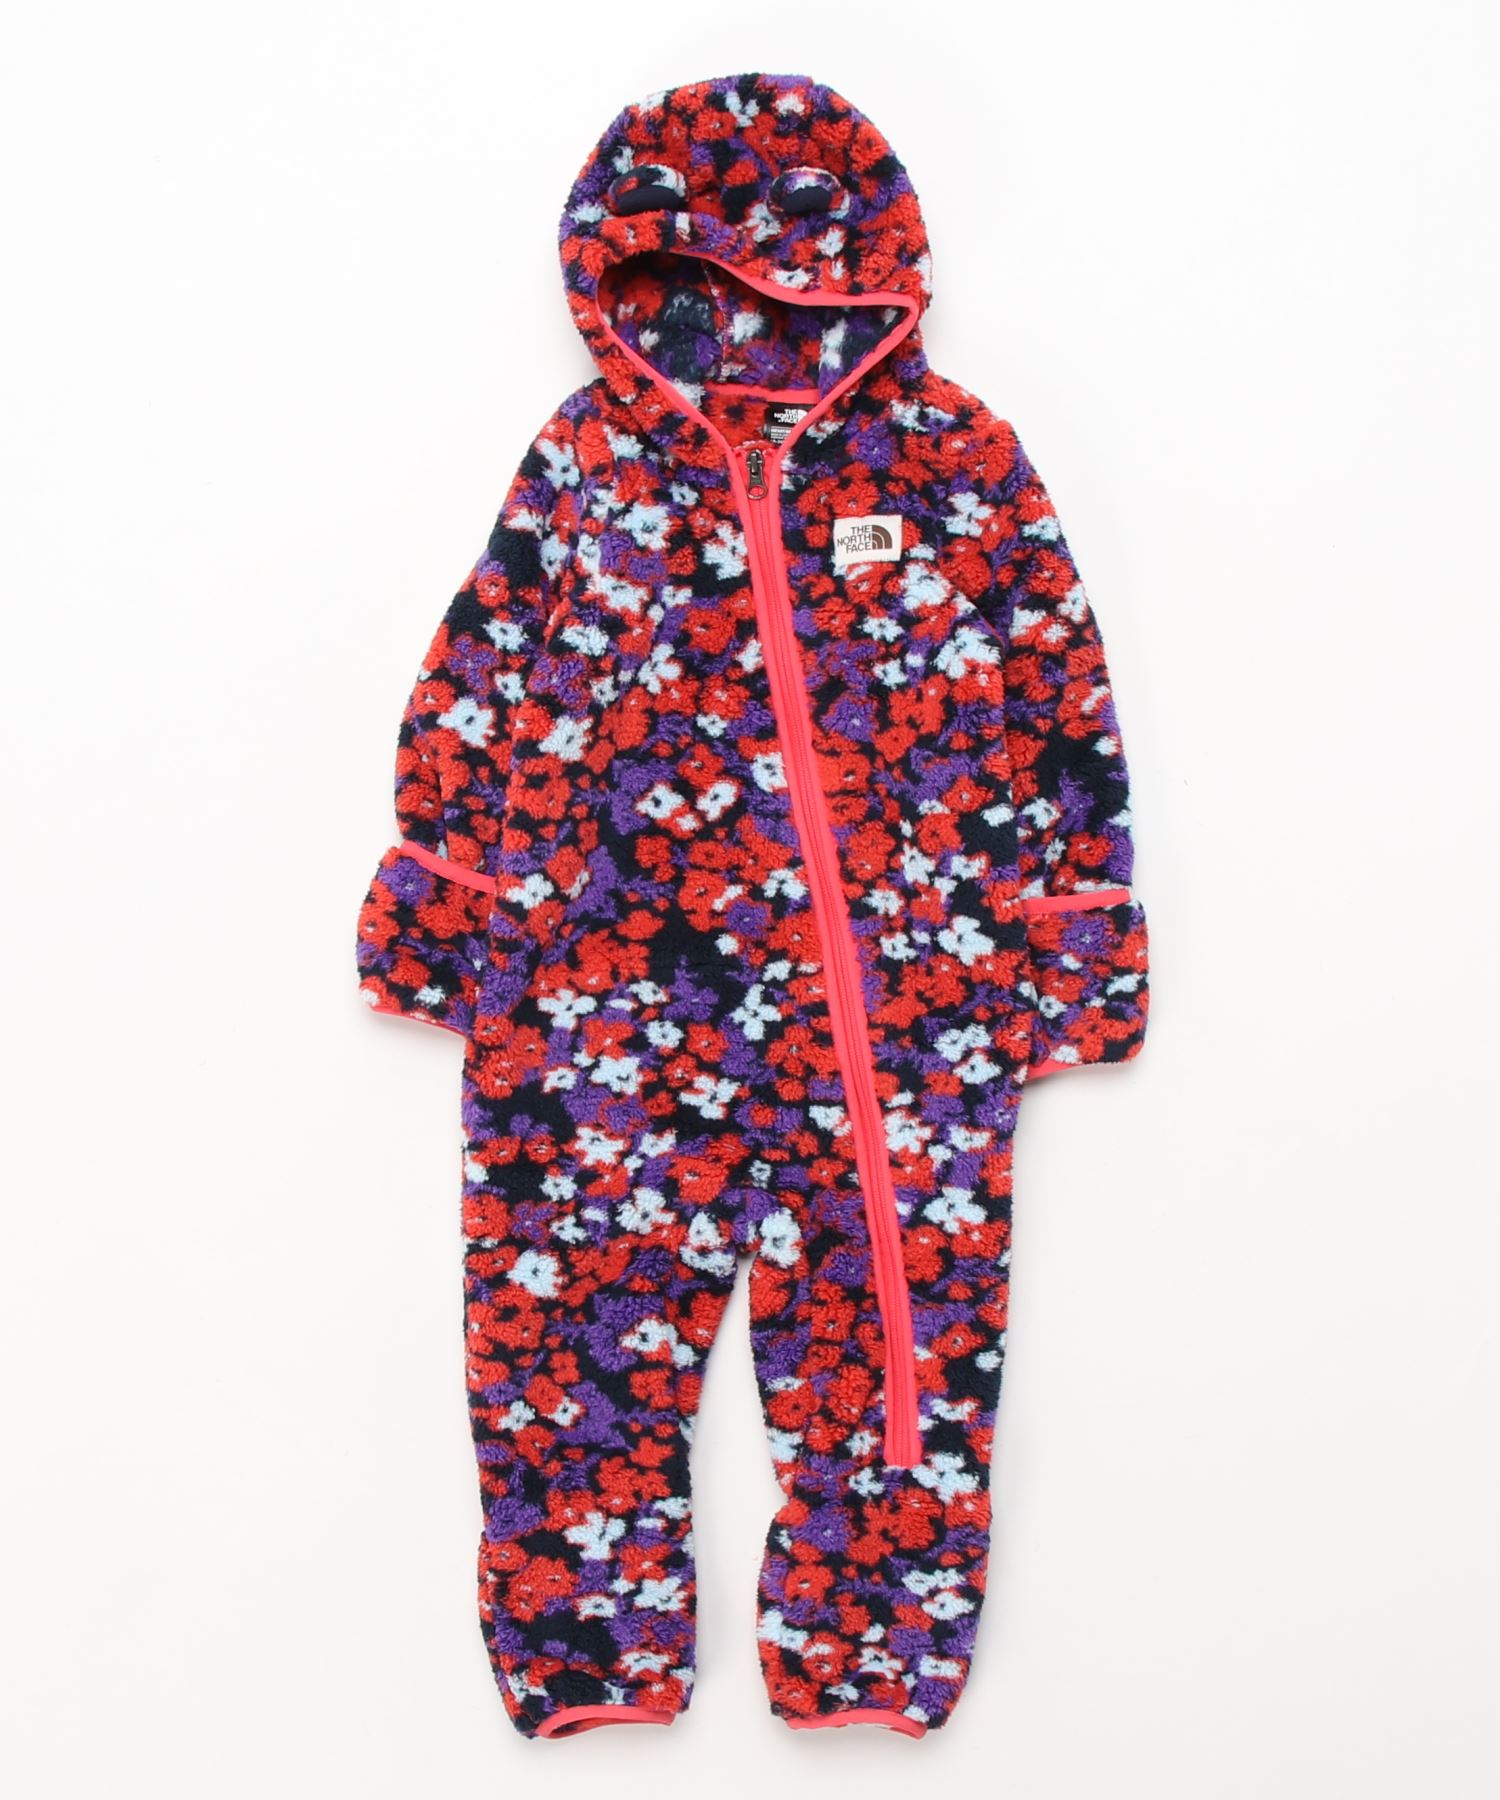 THE NORTH FACE W it CR 耳付きボアフリースロンパース 日本人気超絶の FLEECE ROMPERS KIDS SALE 81%OFF BOA キッズ